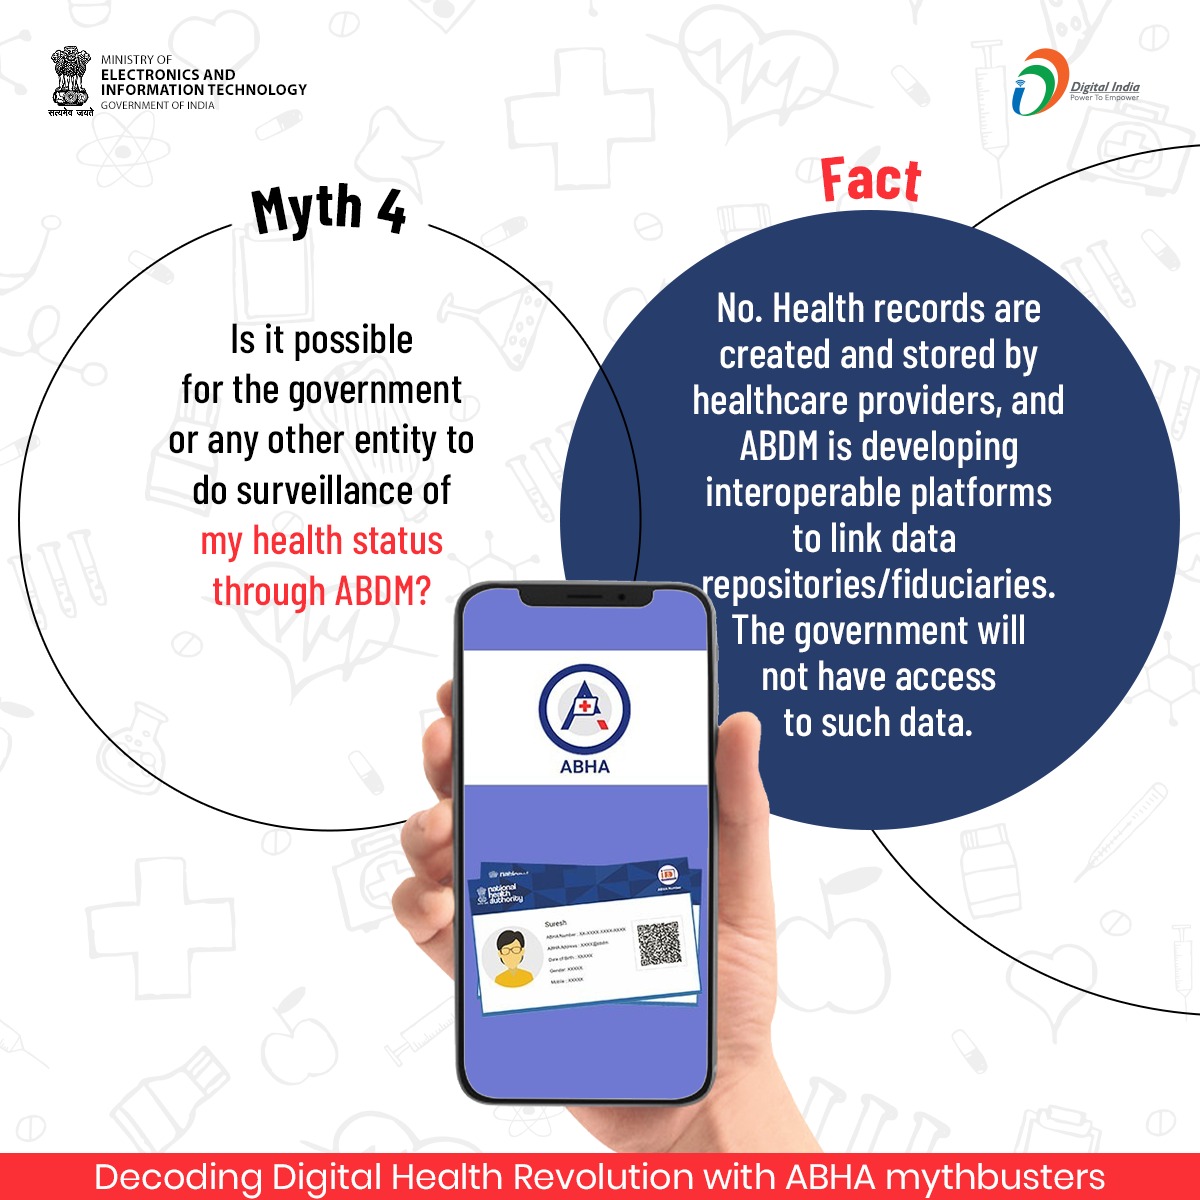 Stressed about the surveillance of your digital health records shared through the #ABDM network? Read this fact check to assuage your concerns. #DigitalIndia #ABHA #AyushmanBharat @GoI_MeitY @MoHFW_INDIA @AyushmanNHA @NHPINDIA